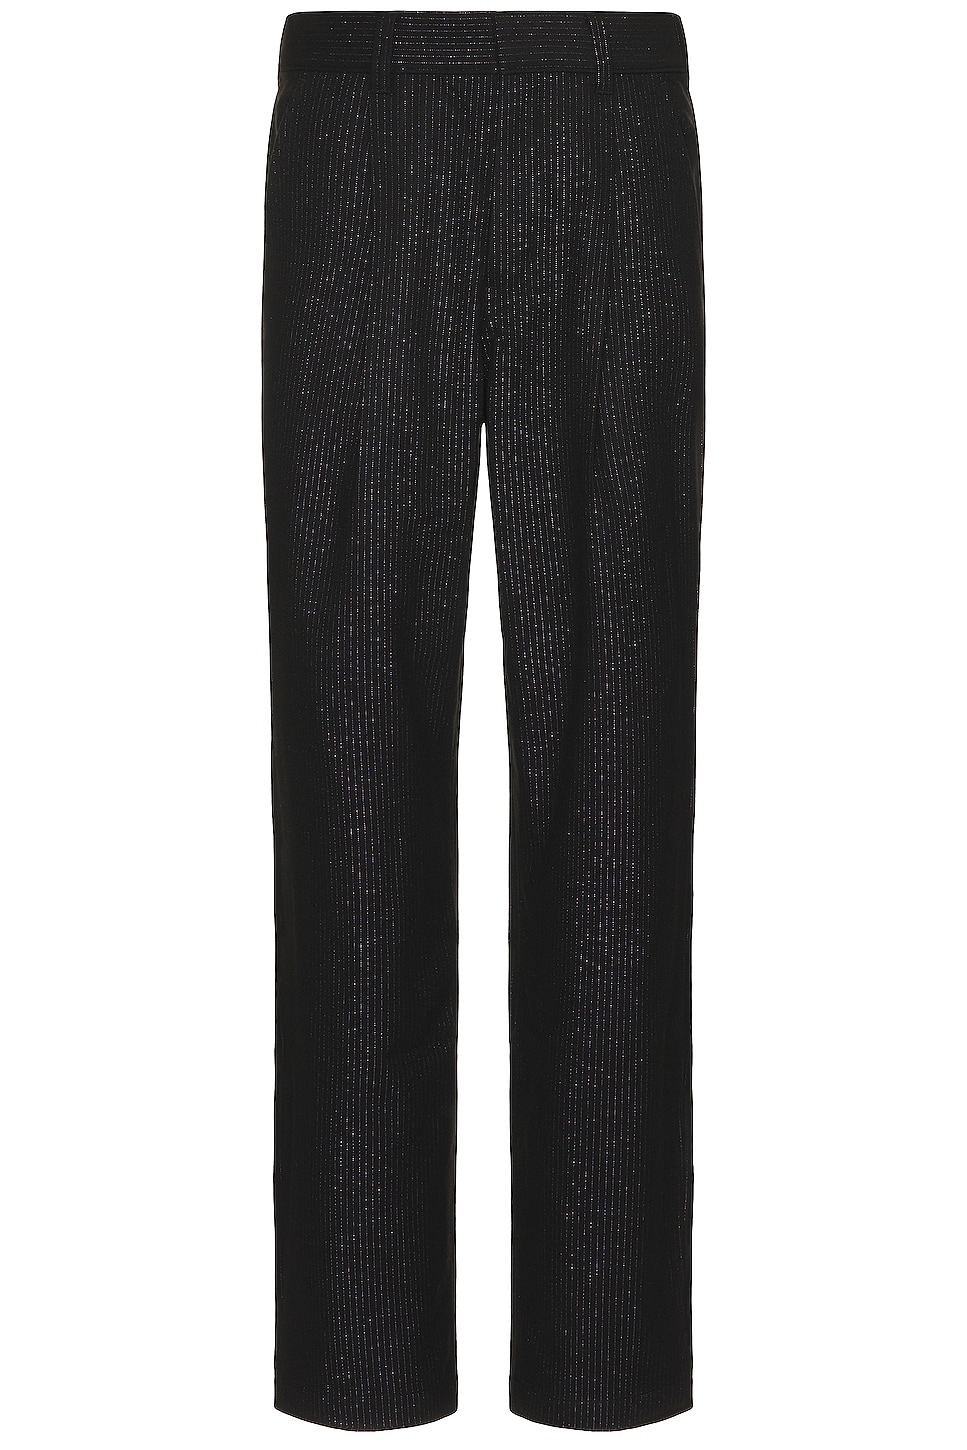 Image 1 of SATURDAYS NYC George Suiting Trouser in Black